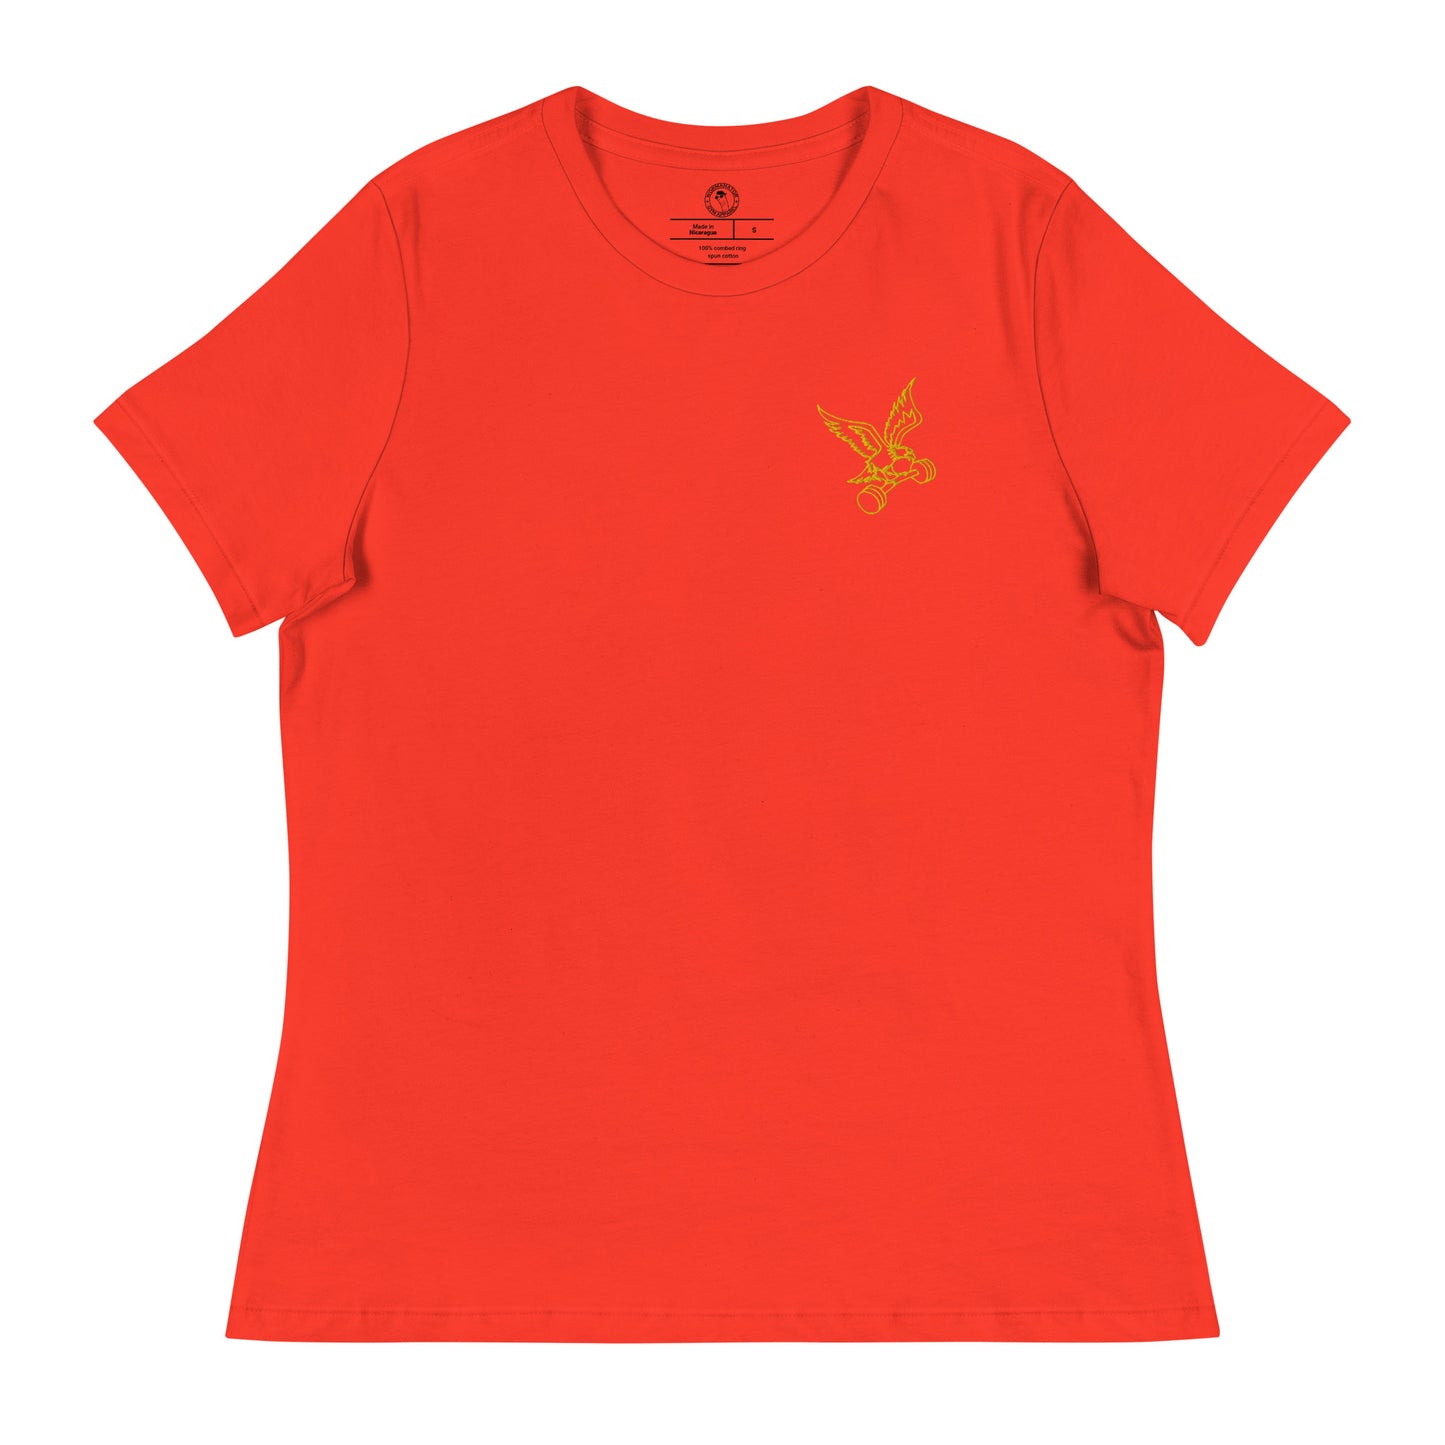 Women's Embroidered Barbell Eagle Shirt in Poppy